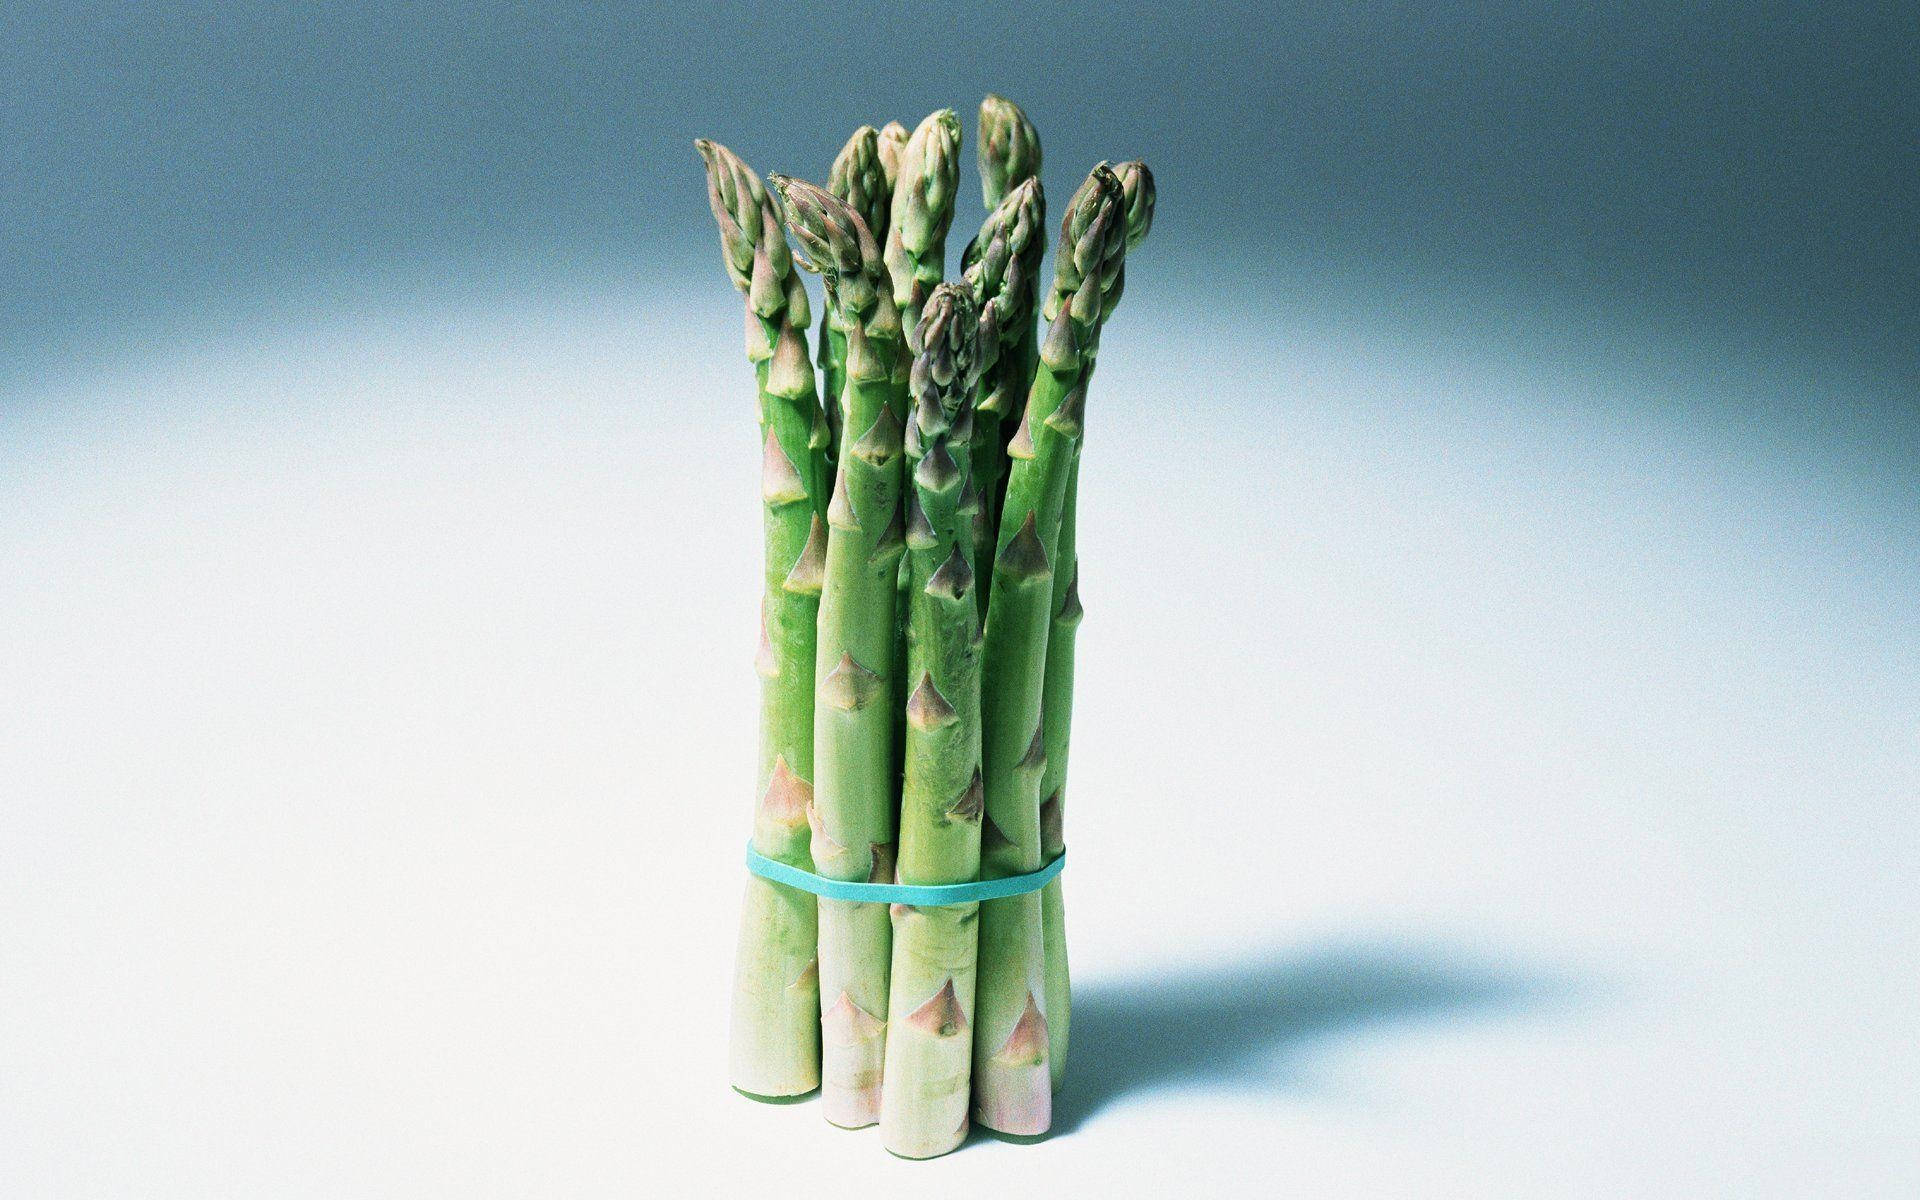 Asparagus Bunch Tied With Rubber Band Wallpaper